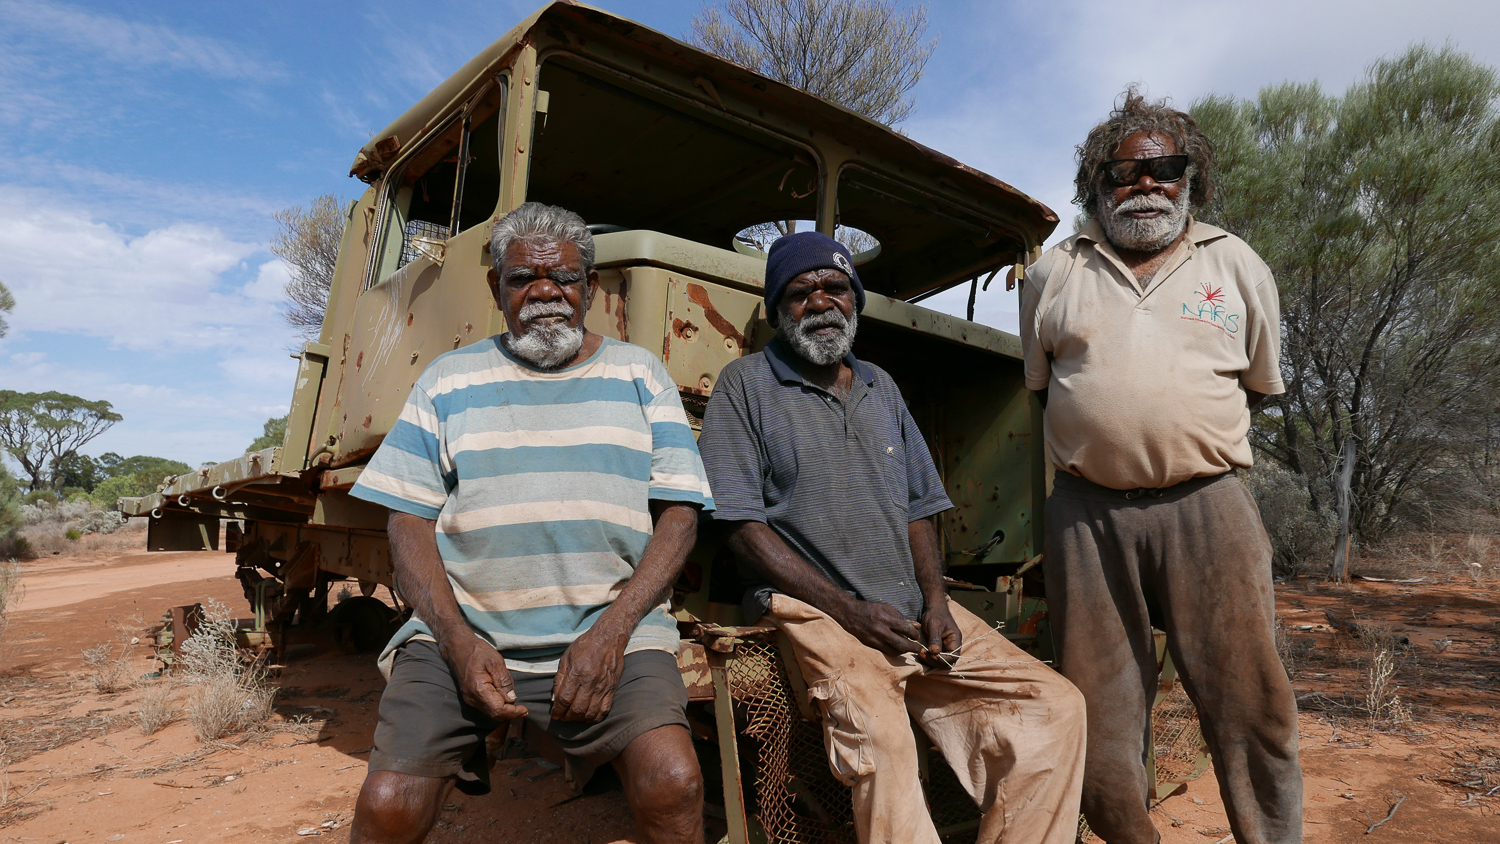 Fred Grant, Rusty Hogan and Ned Grant, with the army truck they travelled in to return to Spinifex Country and establish Tjuntjuntjara community. Fred and Ned were part of the original group of people who were ‘found’ in the bush and relocated to Cundeelee mission. In the late 1980’s they returned to Spinifex Country, because they “wanted to be home”, and to be able to continue to speak their original language and practice their culture. 